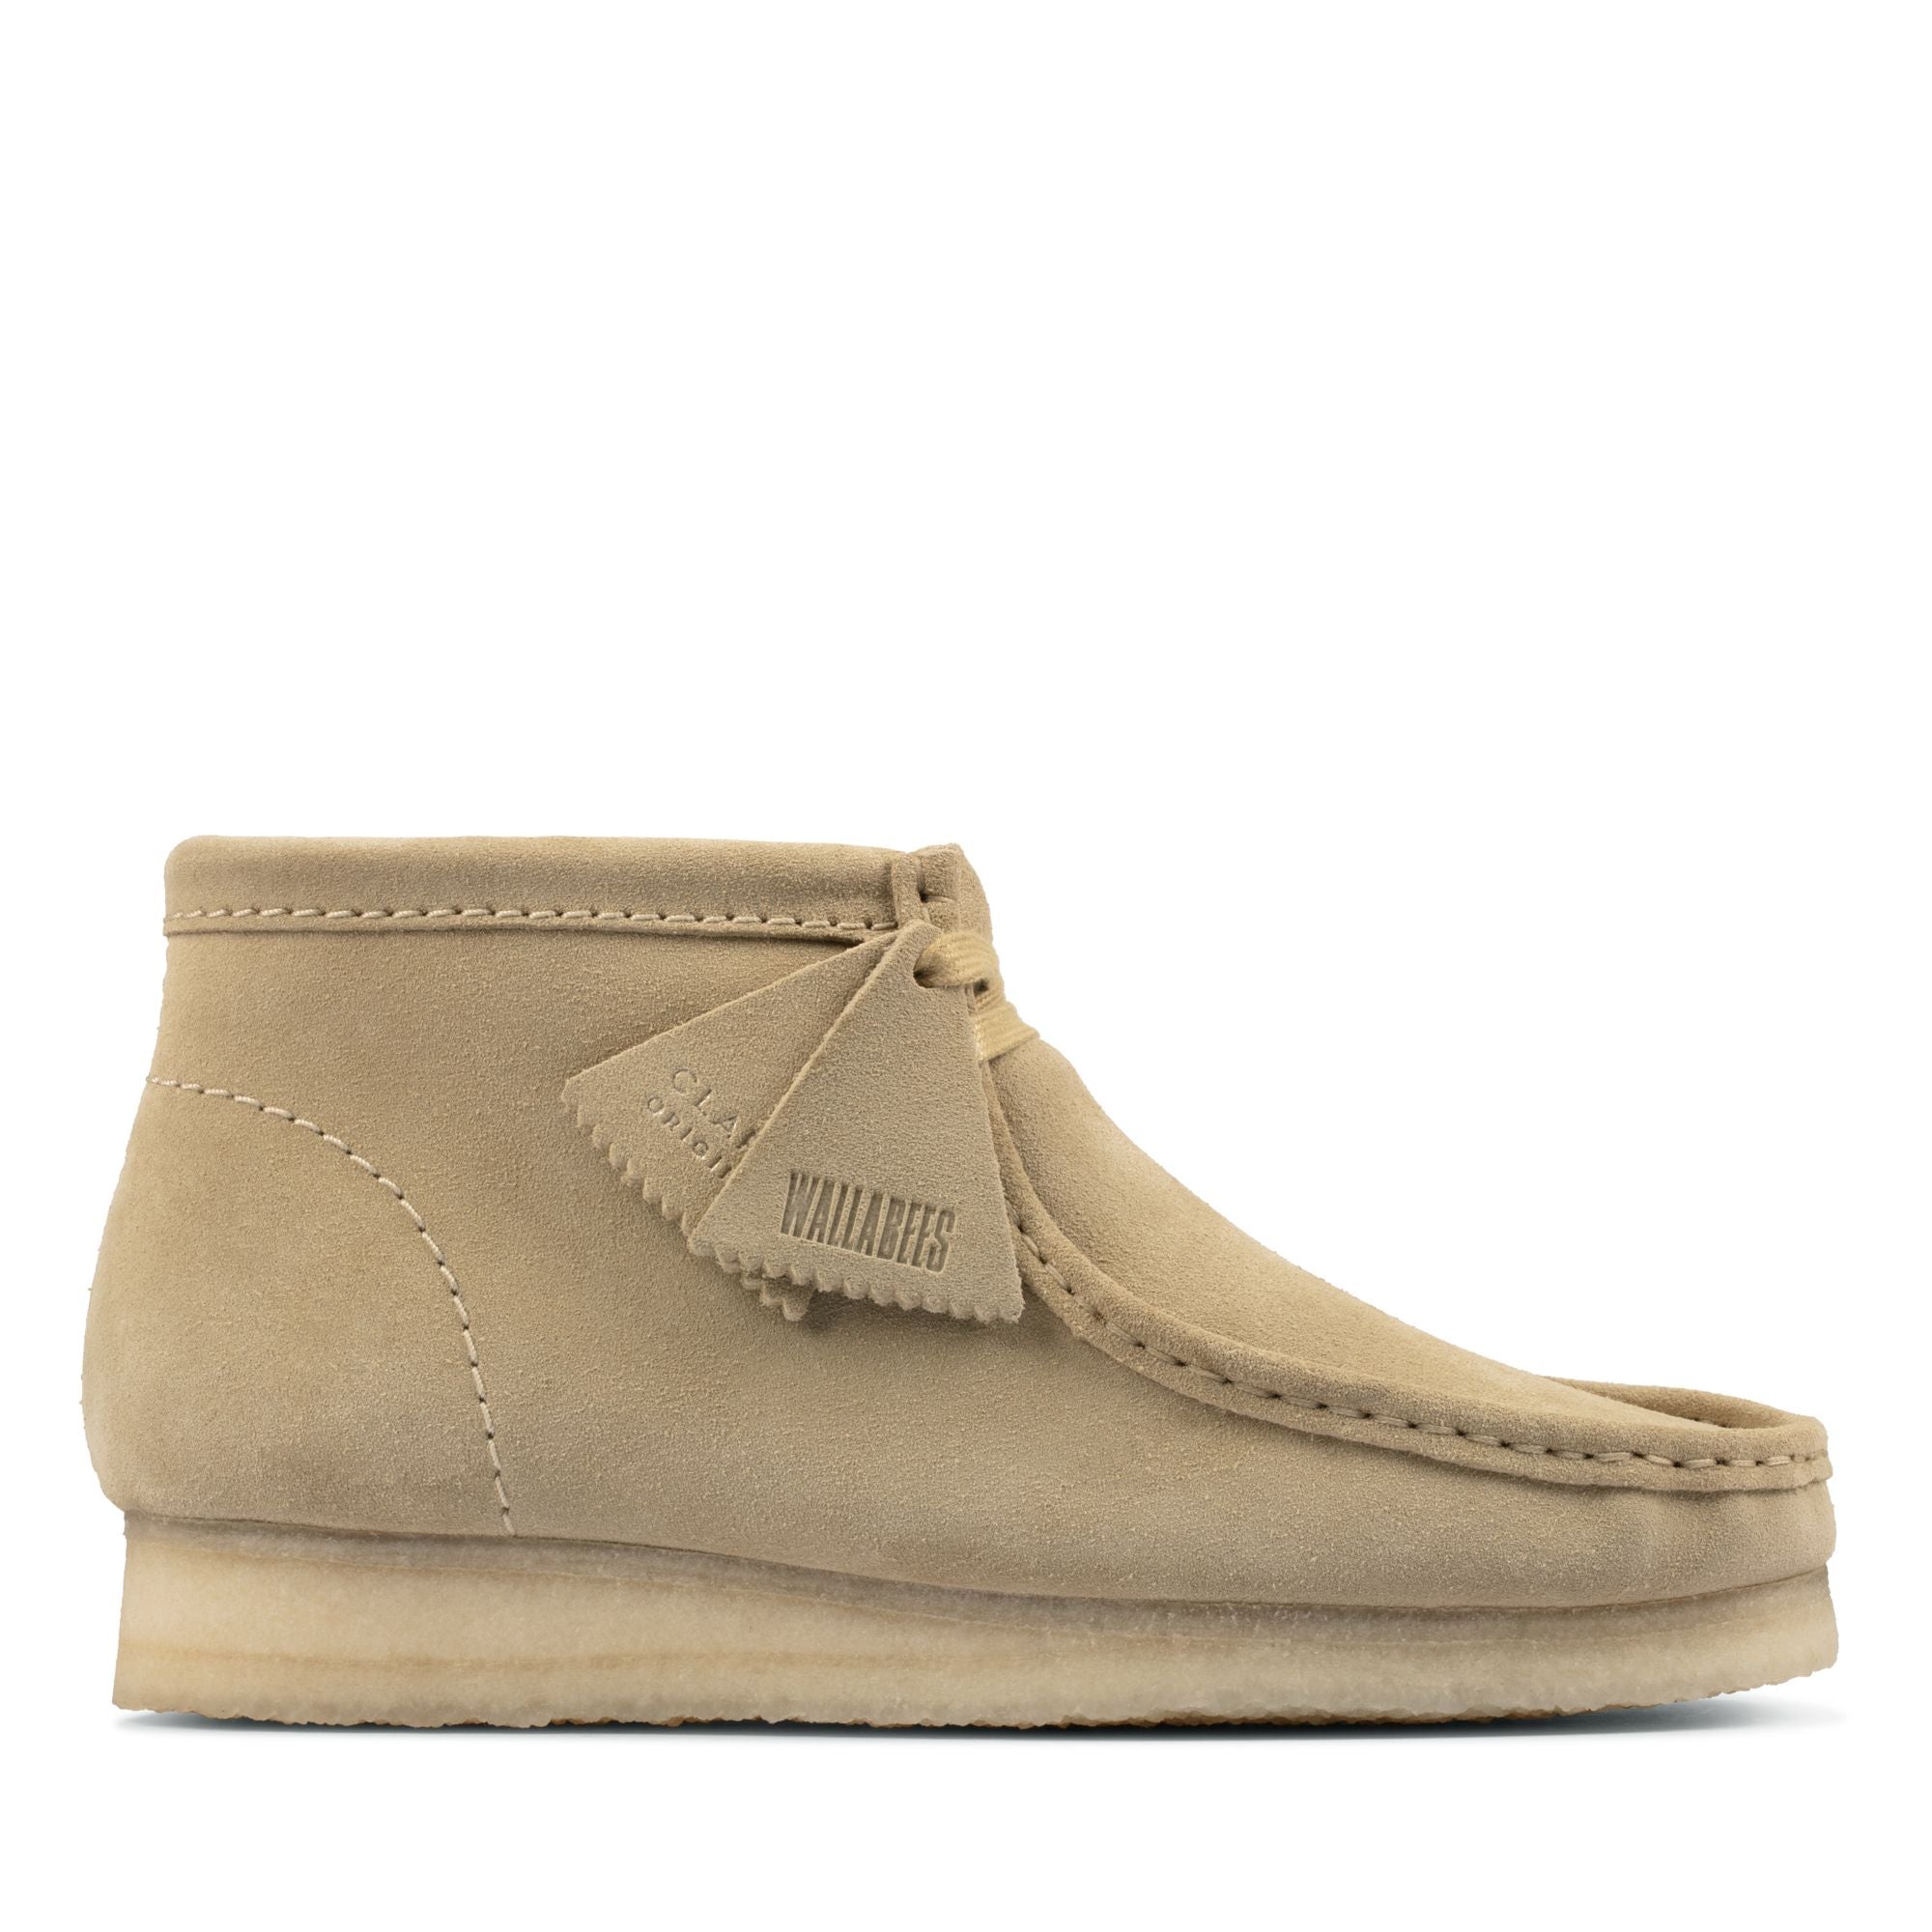 Wallabee Boot Maple Suede - Clarks Canada Official | Clarks Shoes